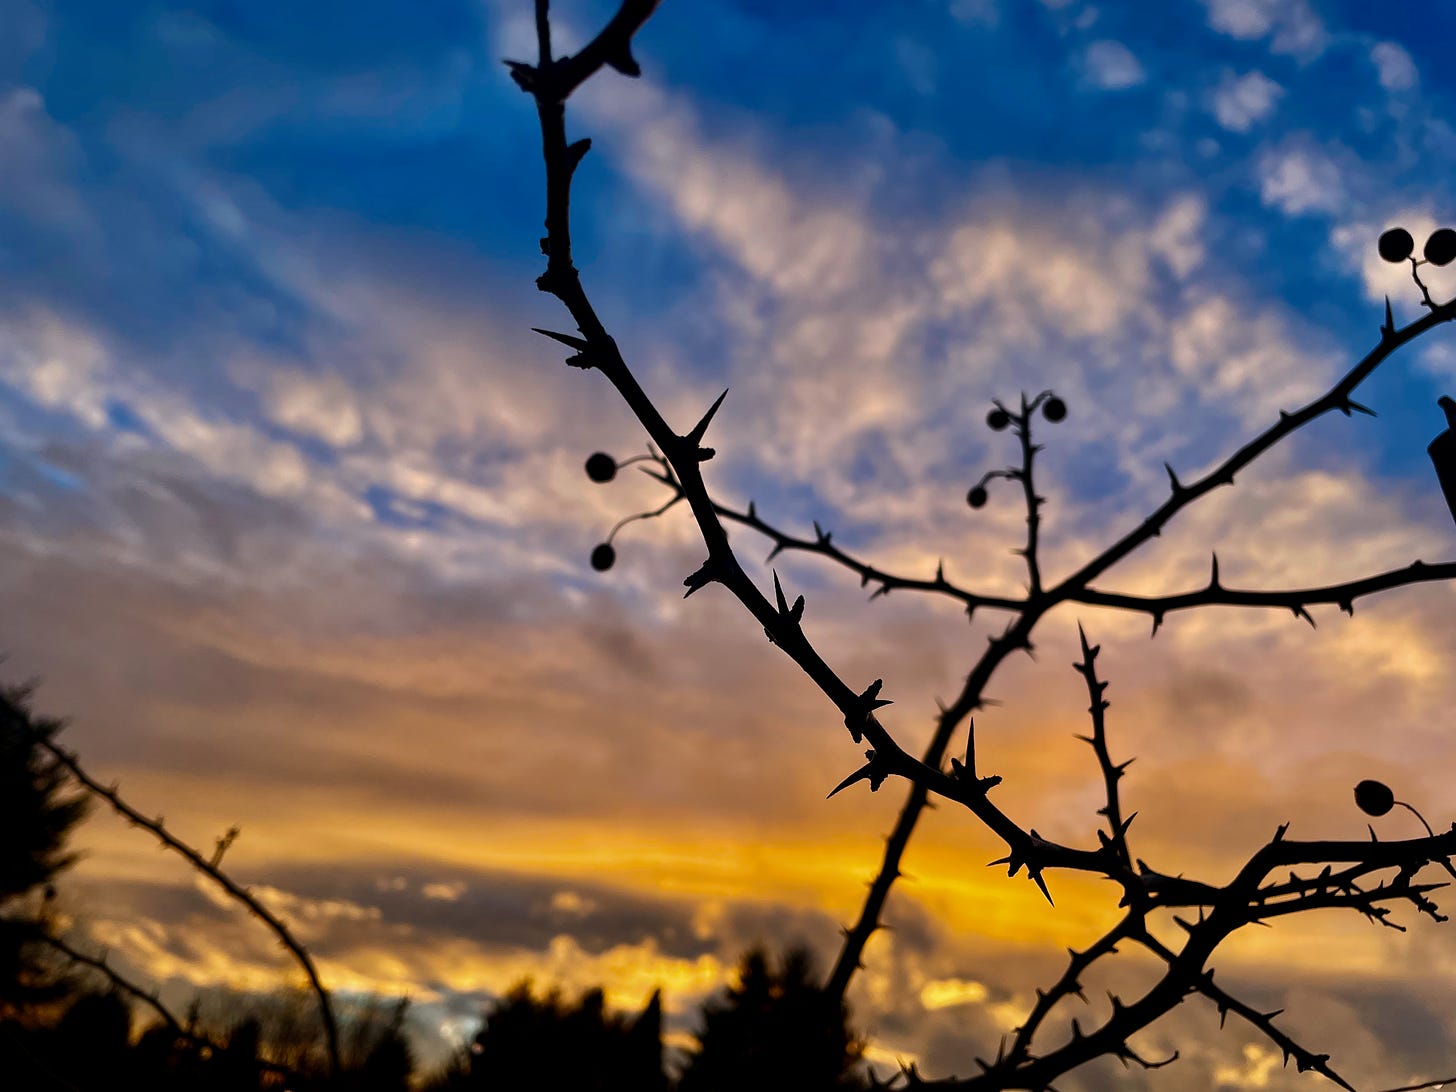 thorny branch against a sunset